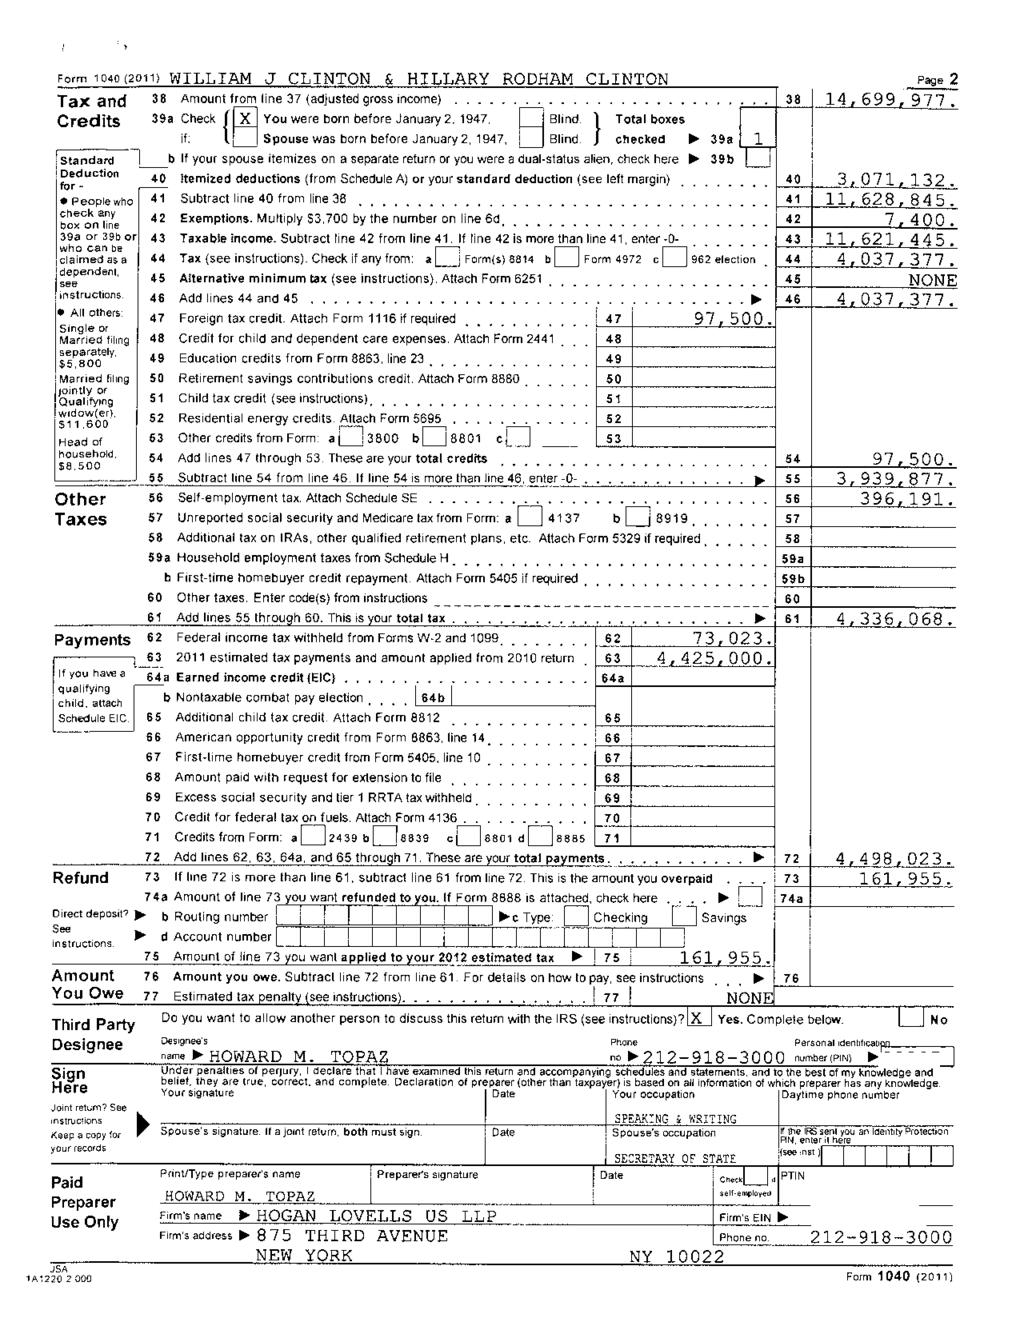 Formloopoln WILLIAM J CLINTON & HILLARY RODHAM CLINTON Page 2 Tax and 38 Amount from line 37 (adjusted gross income) 38 14,699,977. Credits 39a Check Blind.